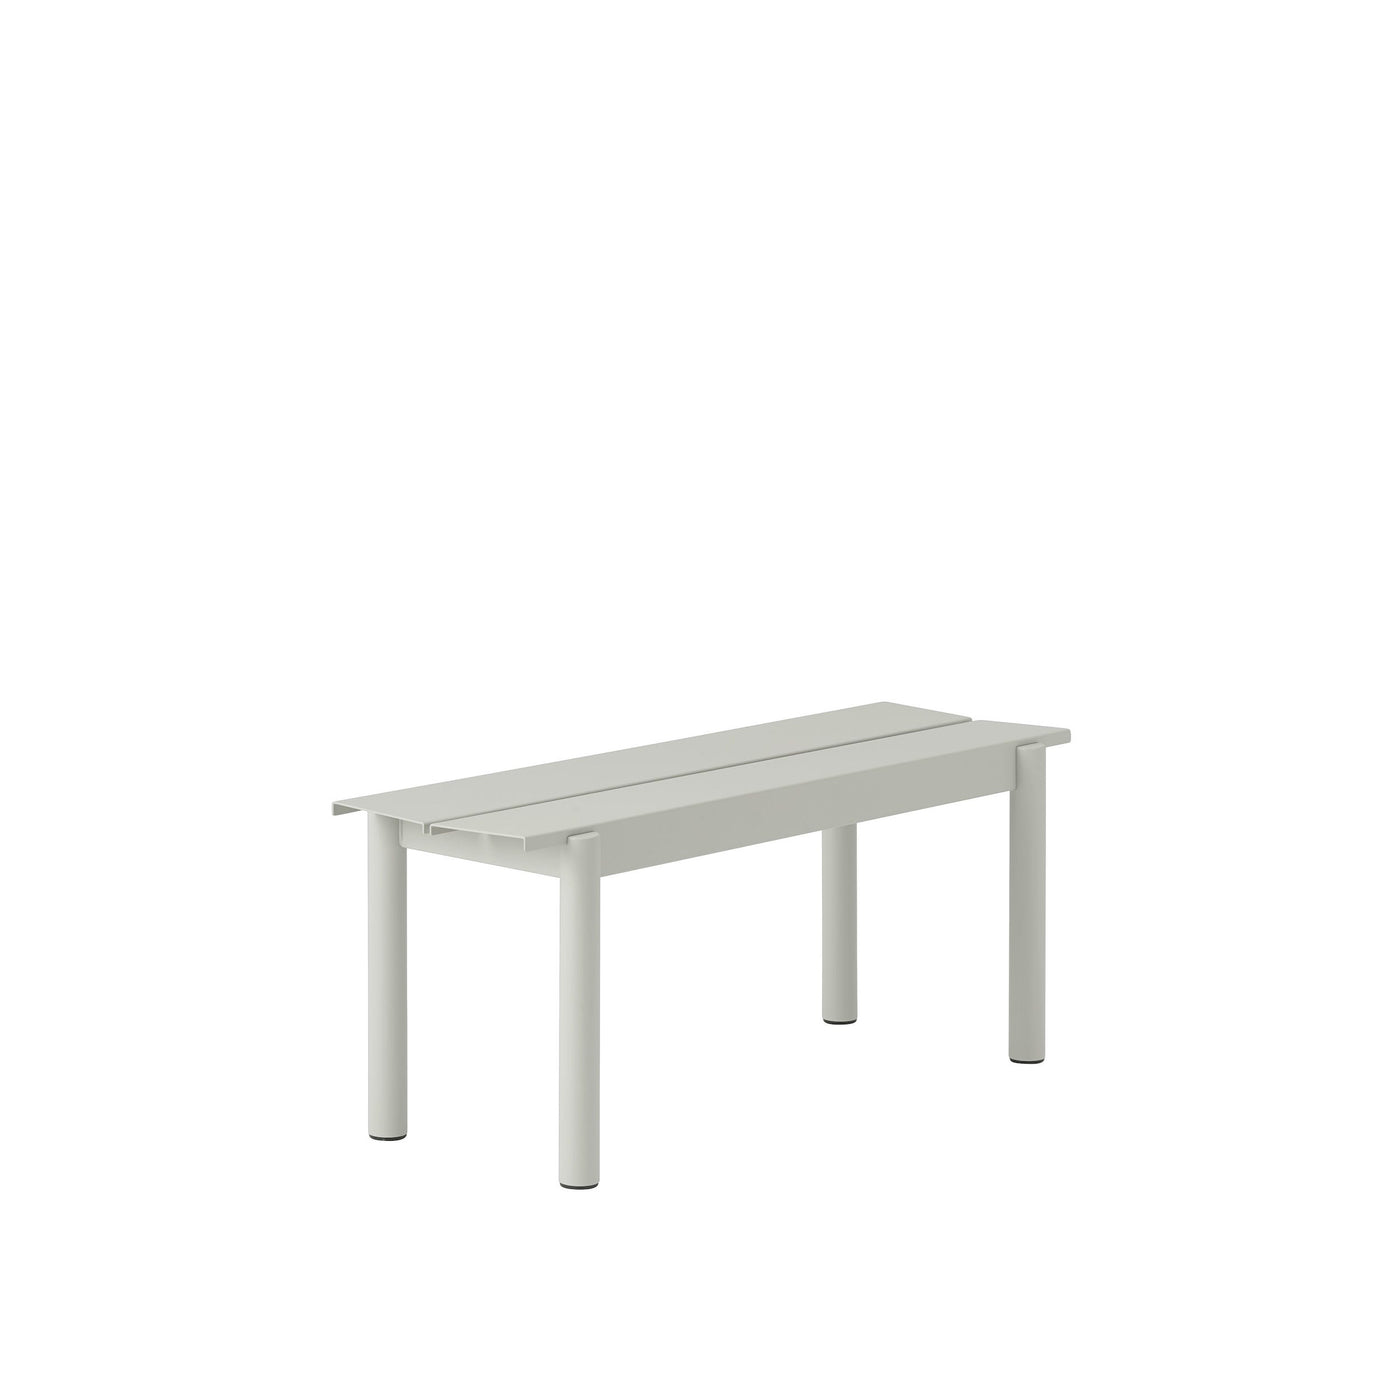 Muuto Linear Steel Bench, 34x110. Outdoor furniture at someday designs. #colour_grey